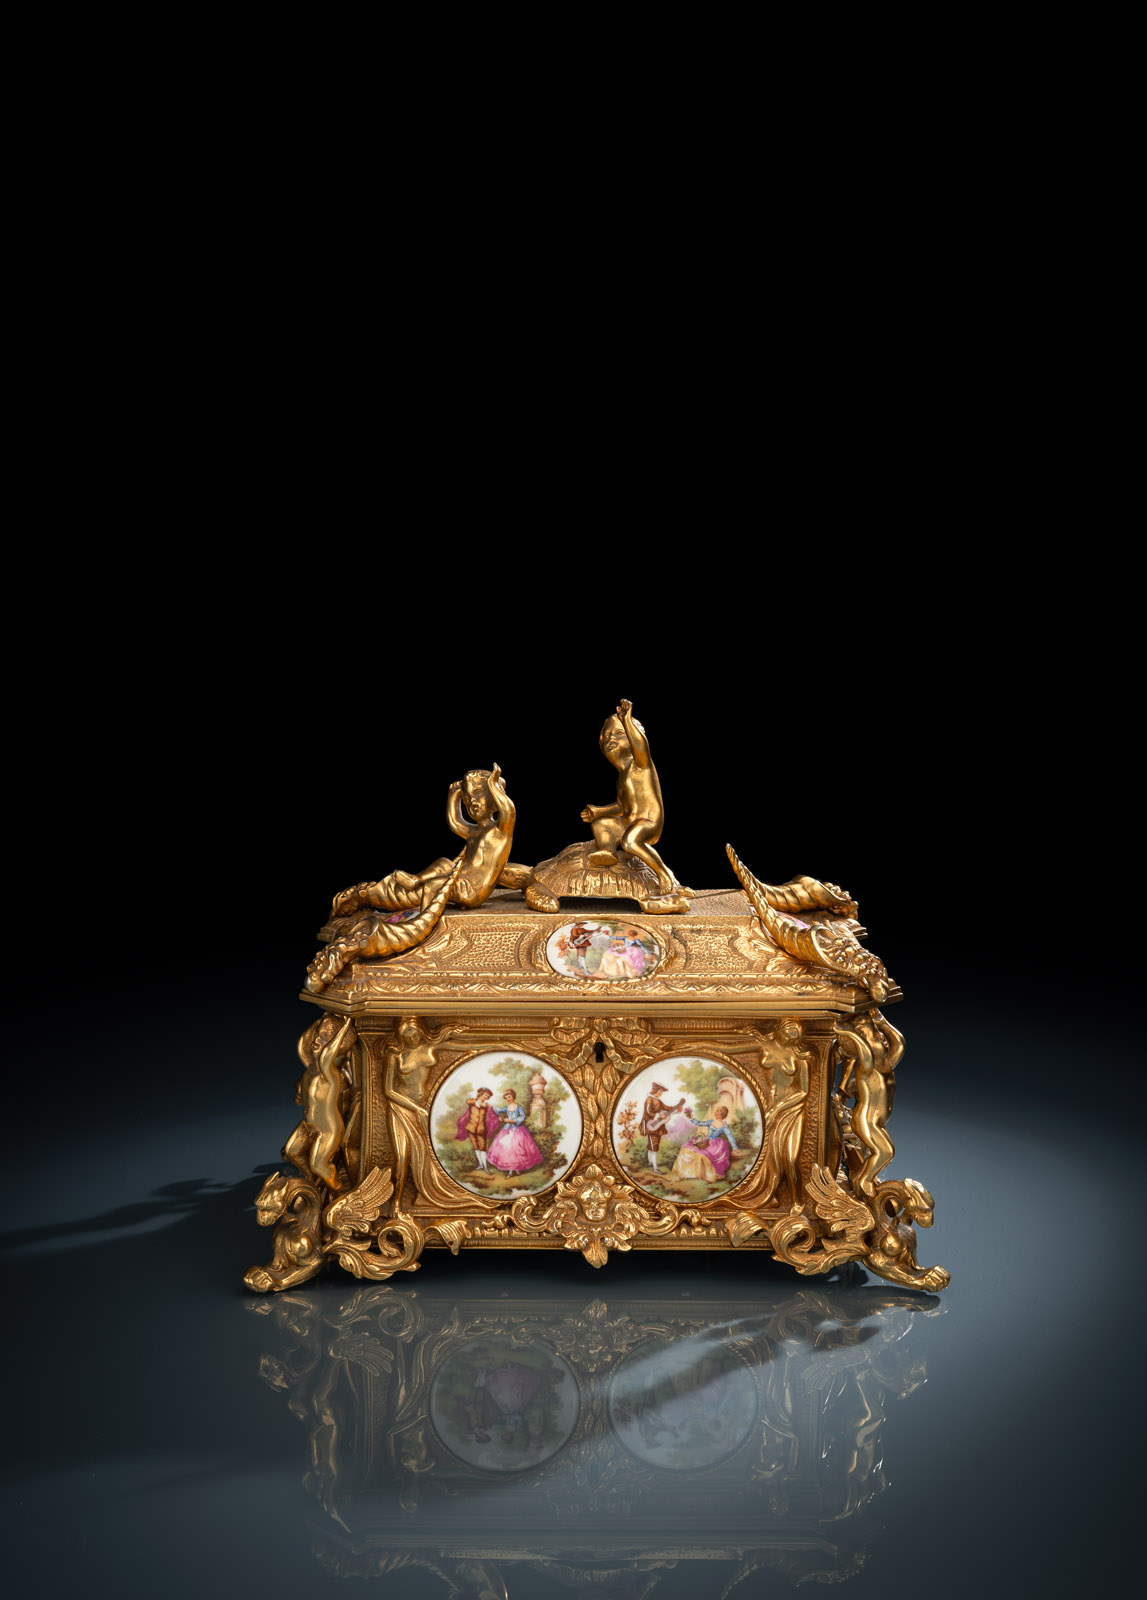 A GILTBRONZE AND PORCELAIN JEWELLERY CASE WITH MUSIC MECHANISM